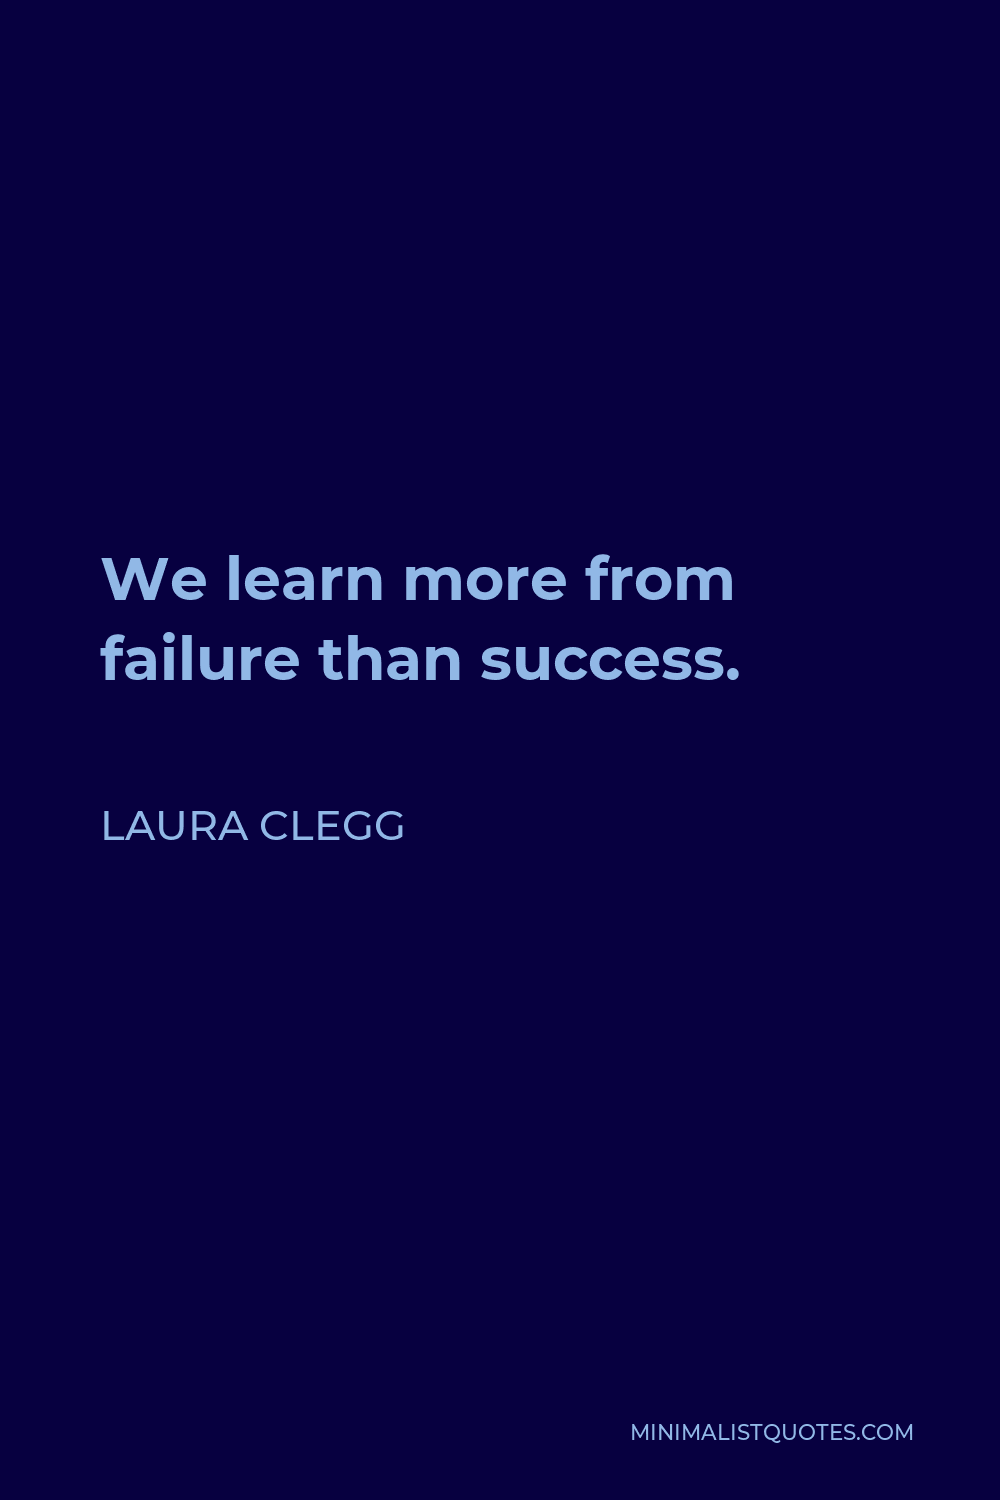 Laura Clegg Quote - We learn more from failure than success.